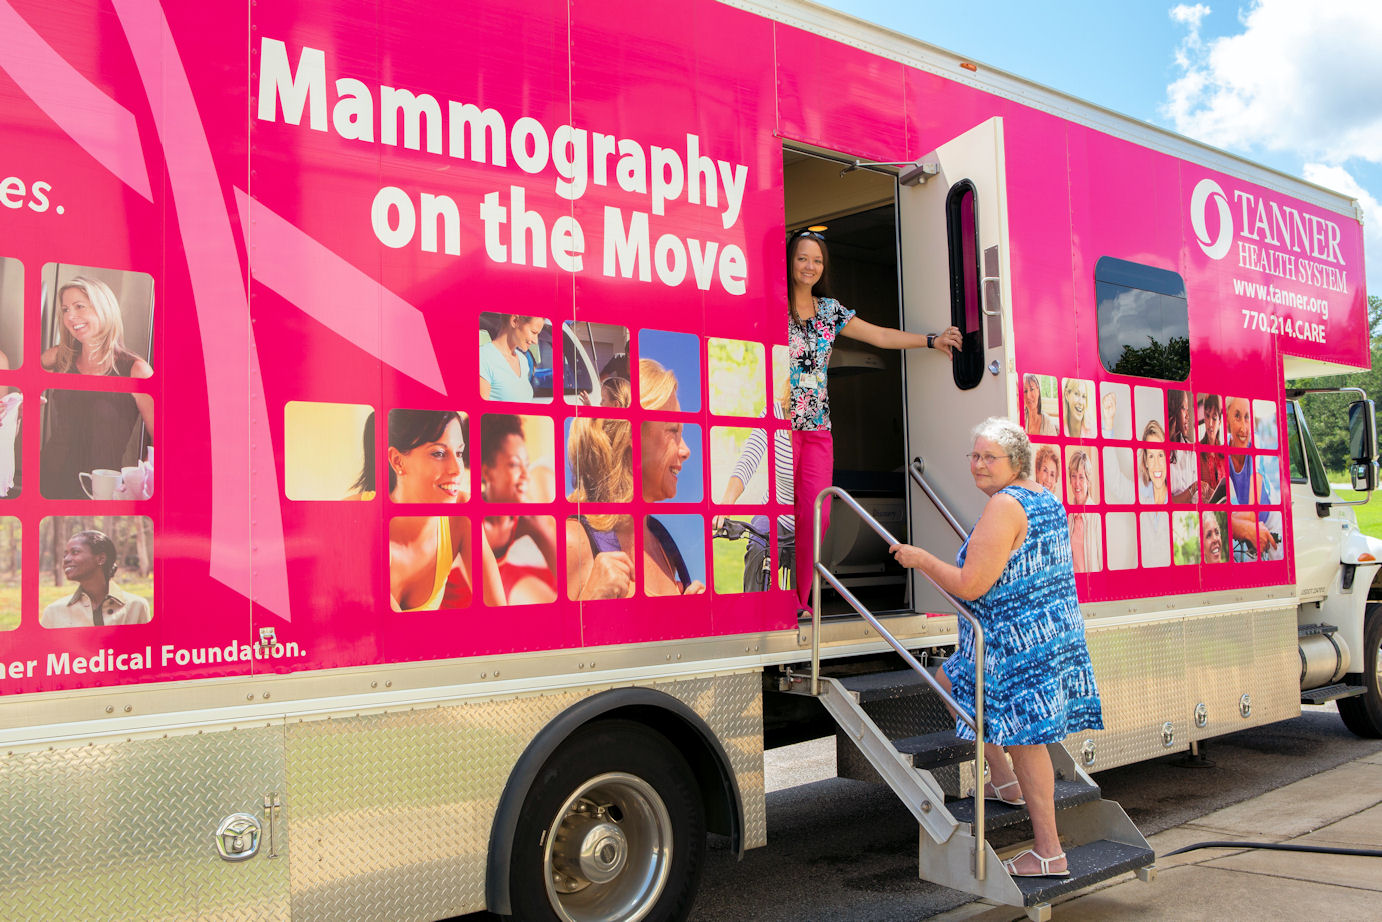 Elsie Wilson climbing about the mobile mammography unit